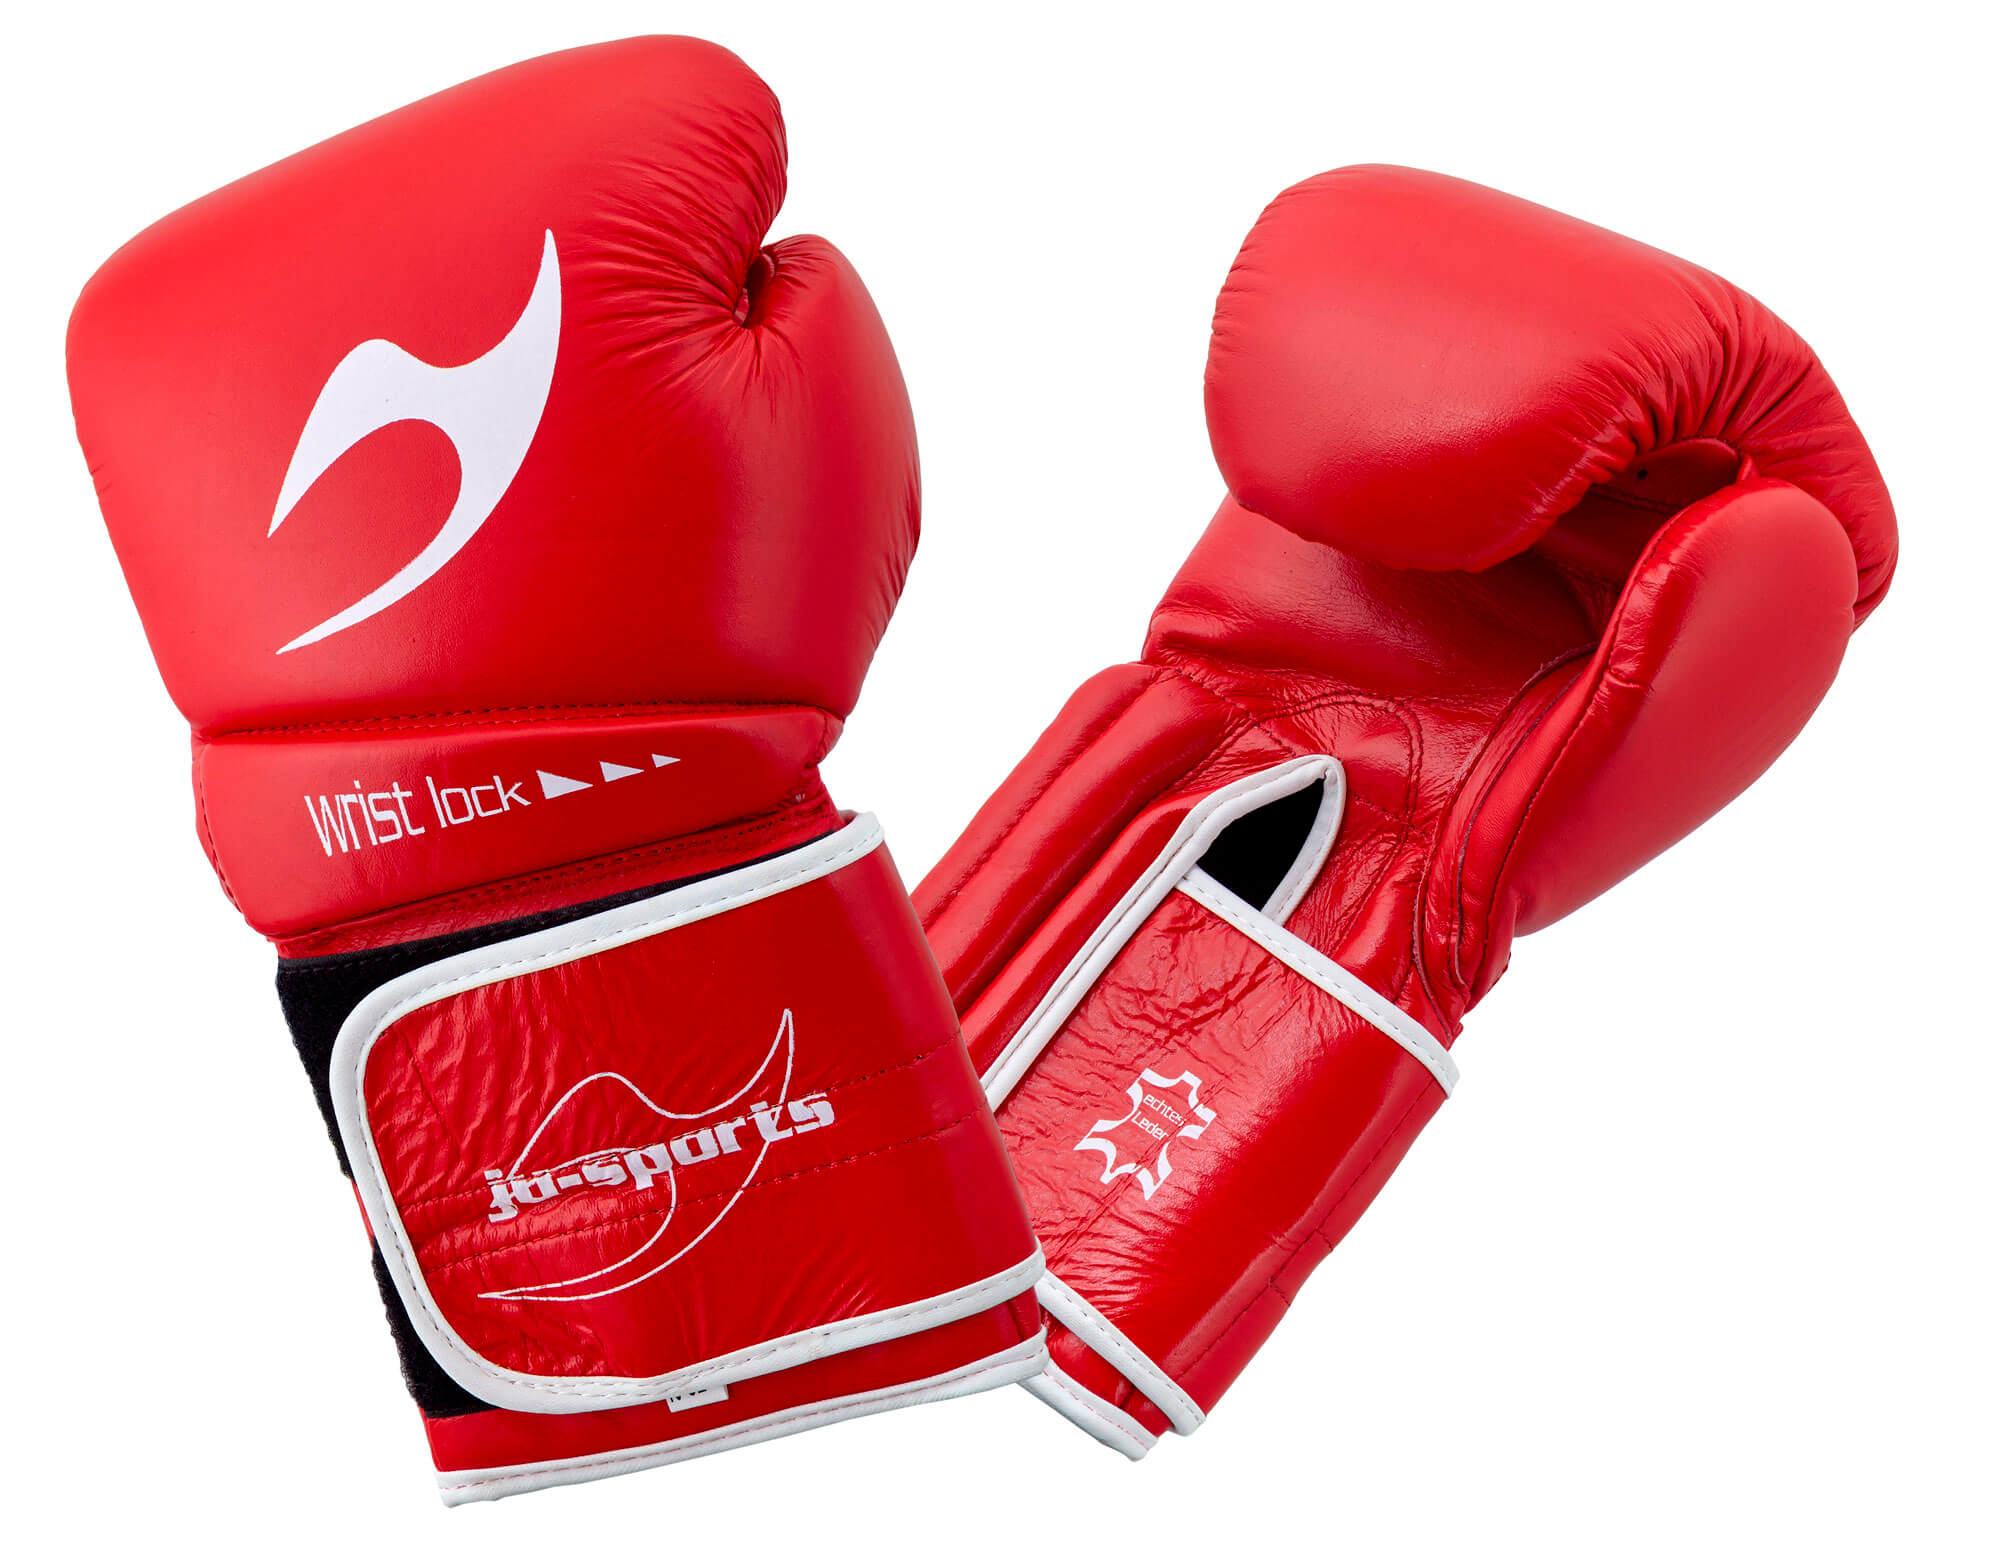 Ju-Sports Boxing Gloves C16 Competitor Pro Leather red 10 oz